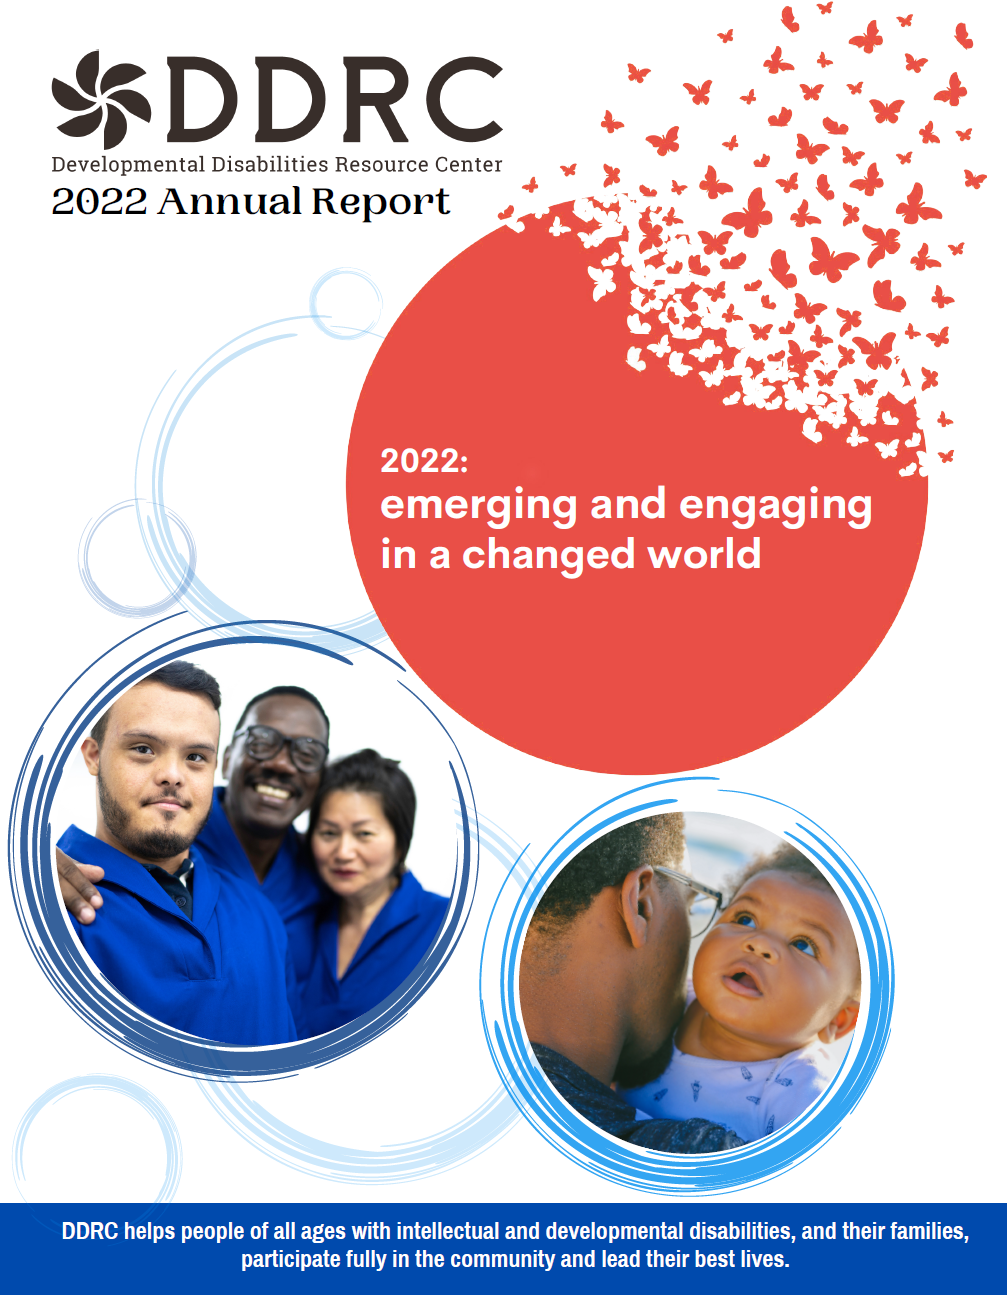 View DDRC's 2022 Annual Report